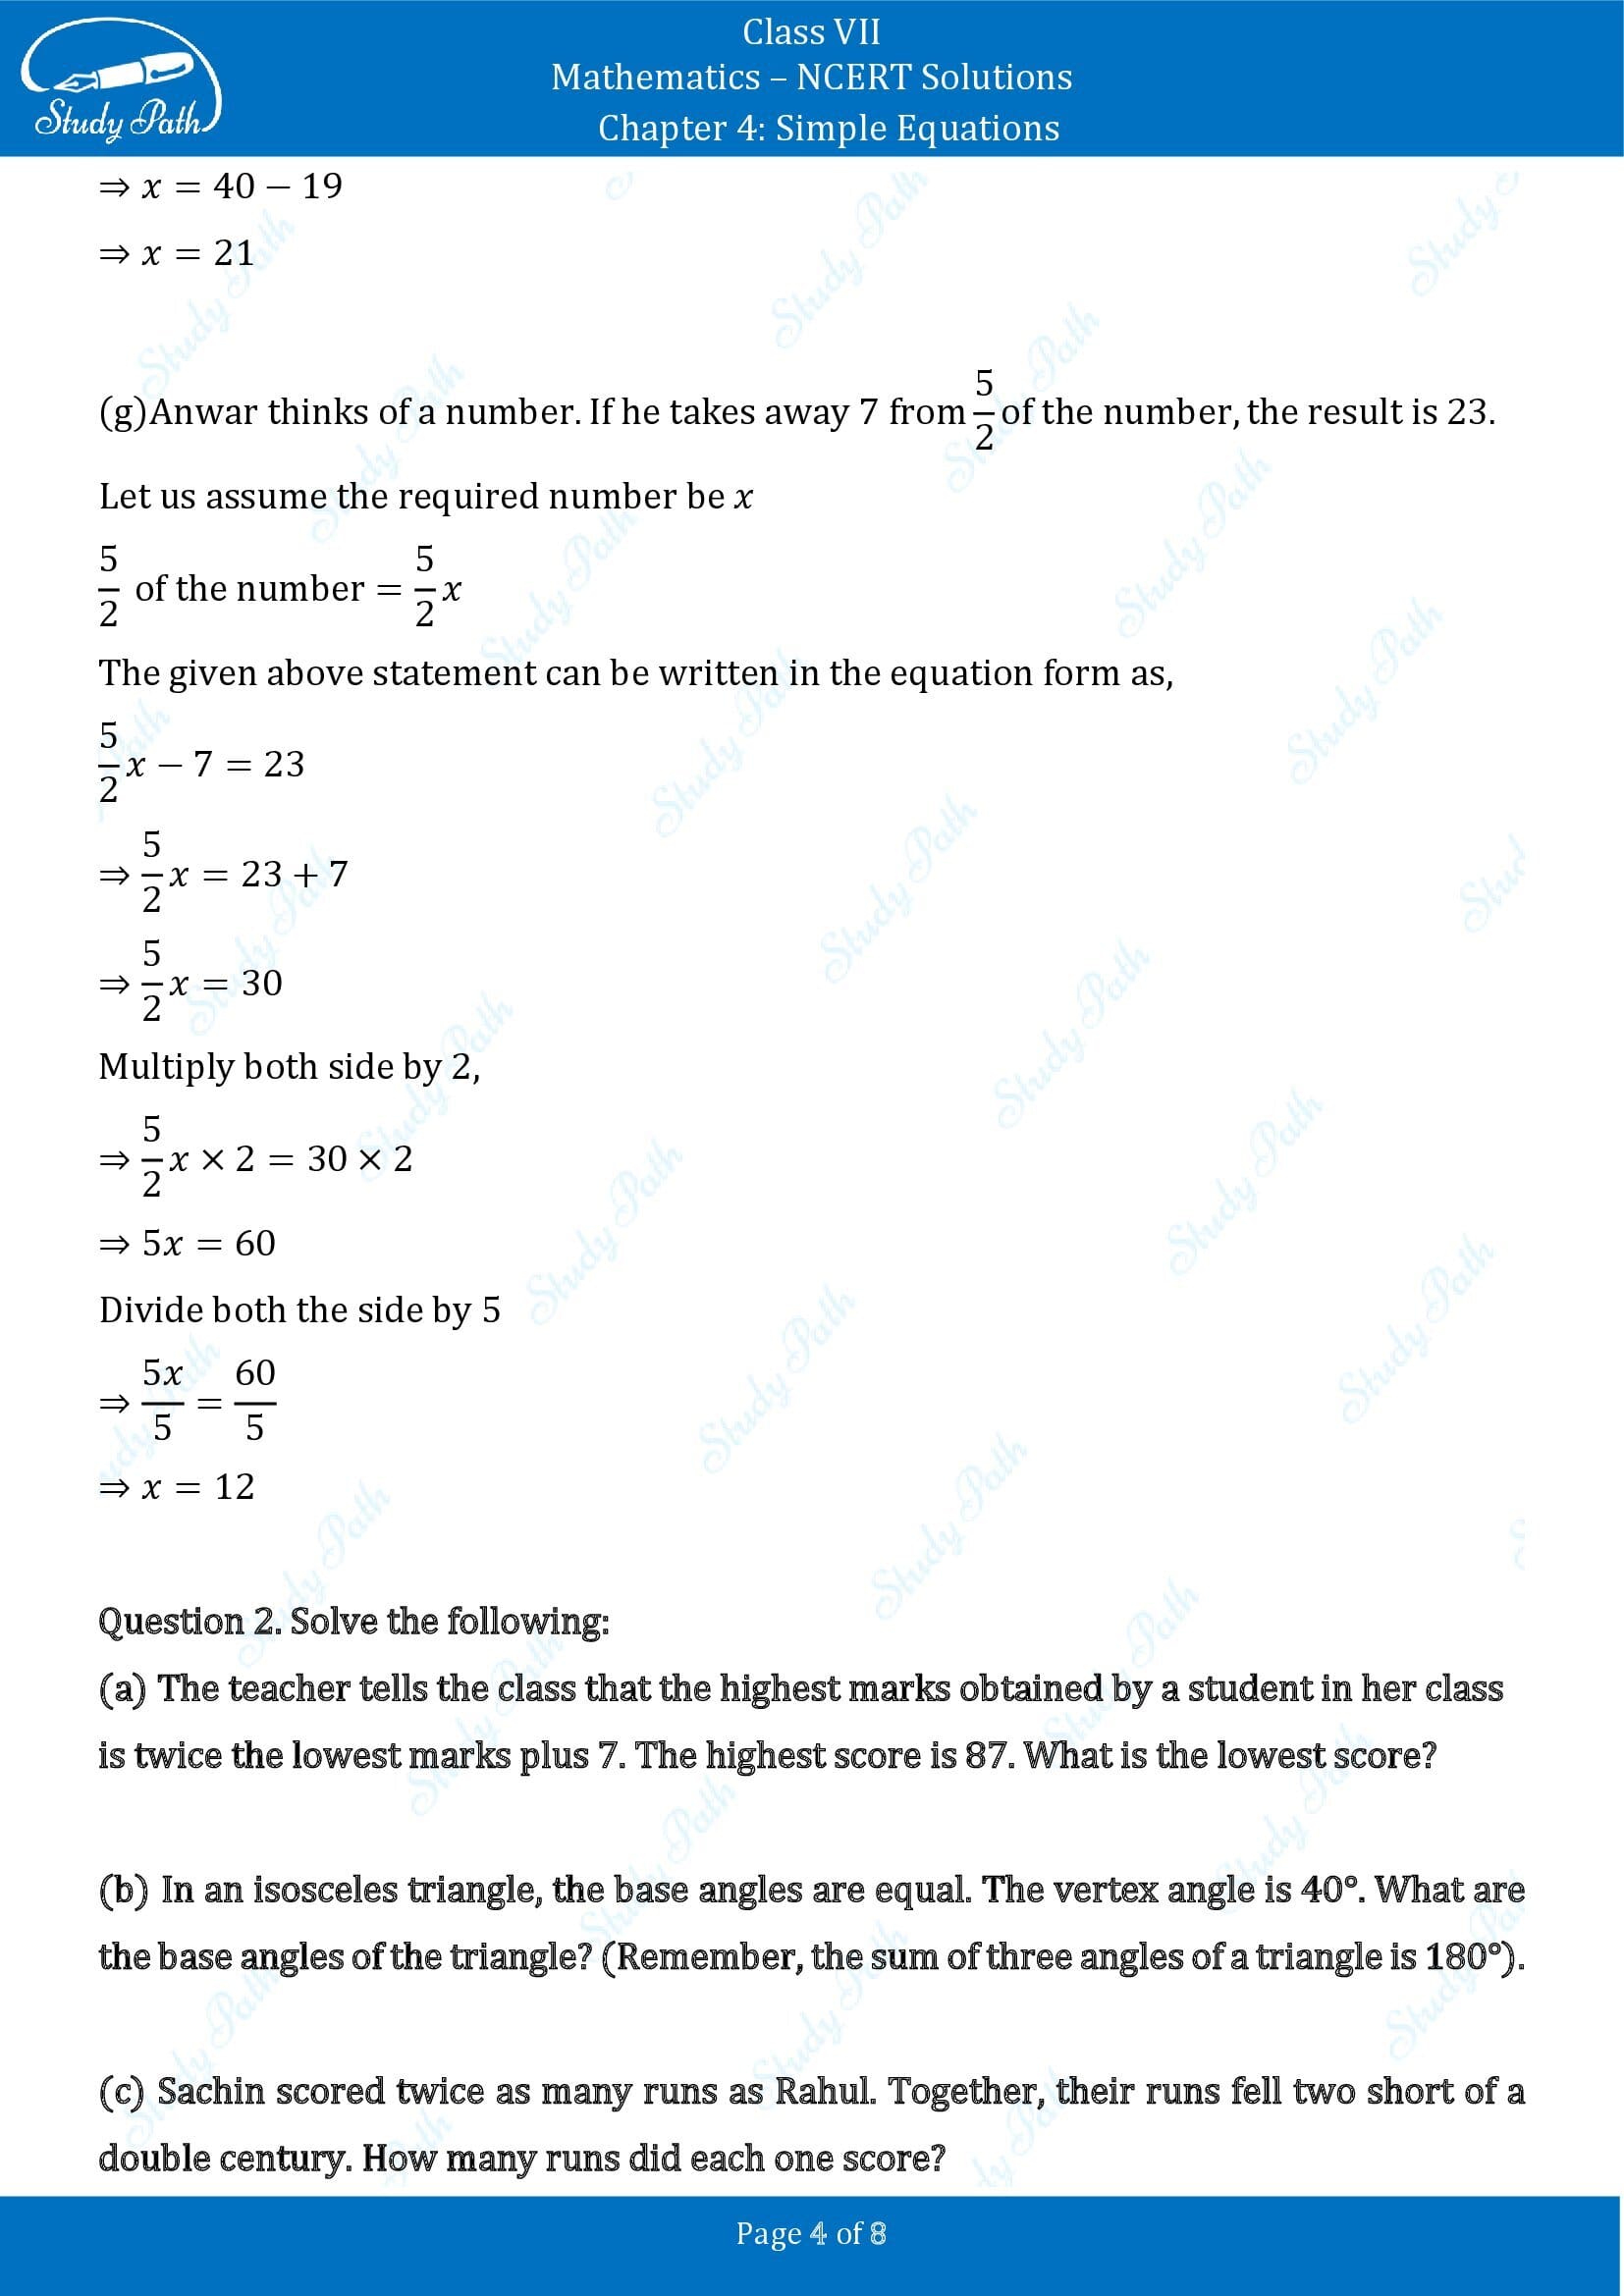 NCERT Solutions for Class 7 Maths Chapter 4 Simple Equations Exercise 4.4 00004